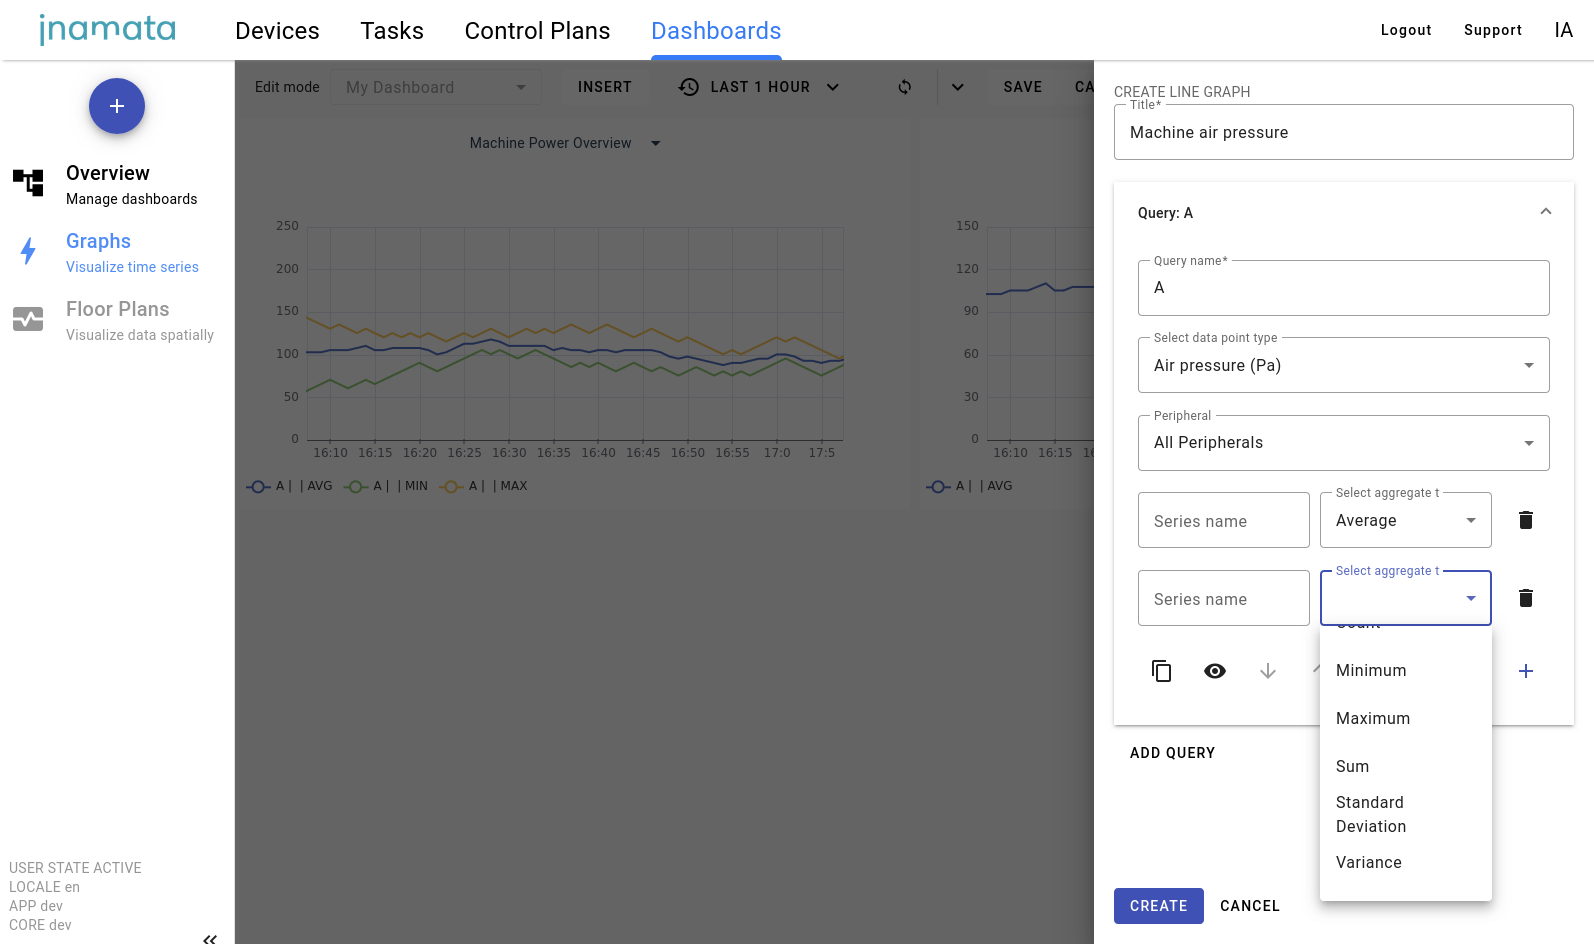 A screenshot of Inamata's IoT dashboards web-app page to create graphs from the collected data.